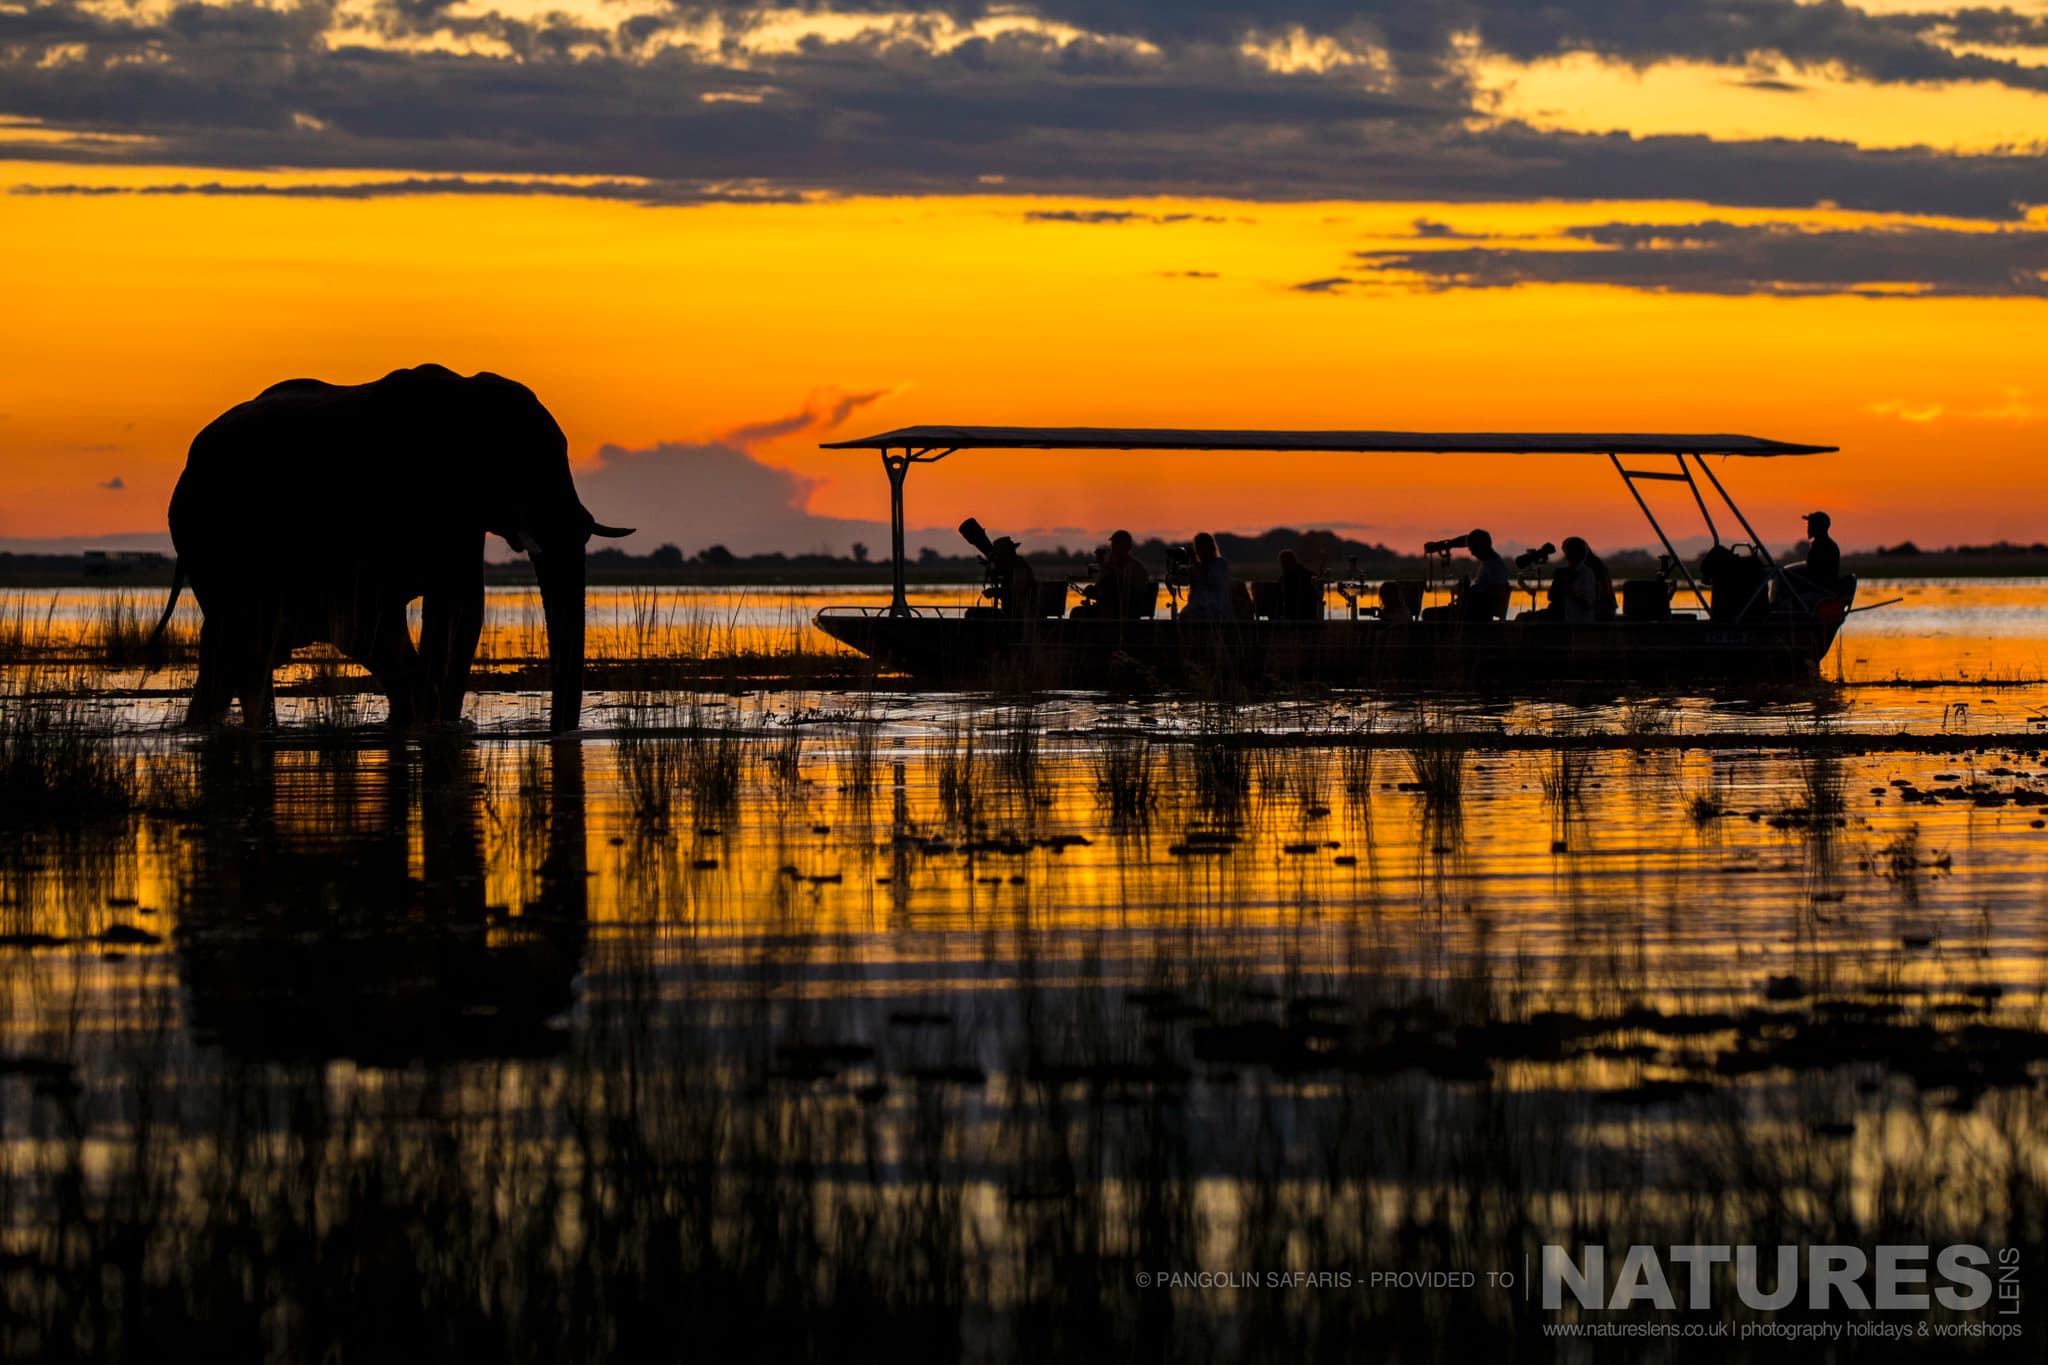 An Elephant On The Chobe River With One Of The Pangolin Photo Boats